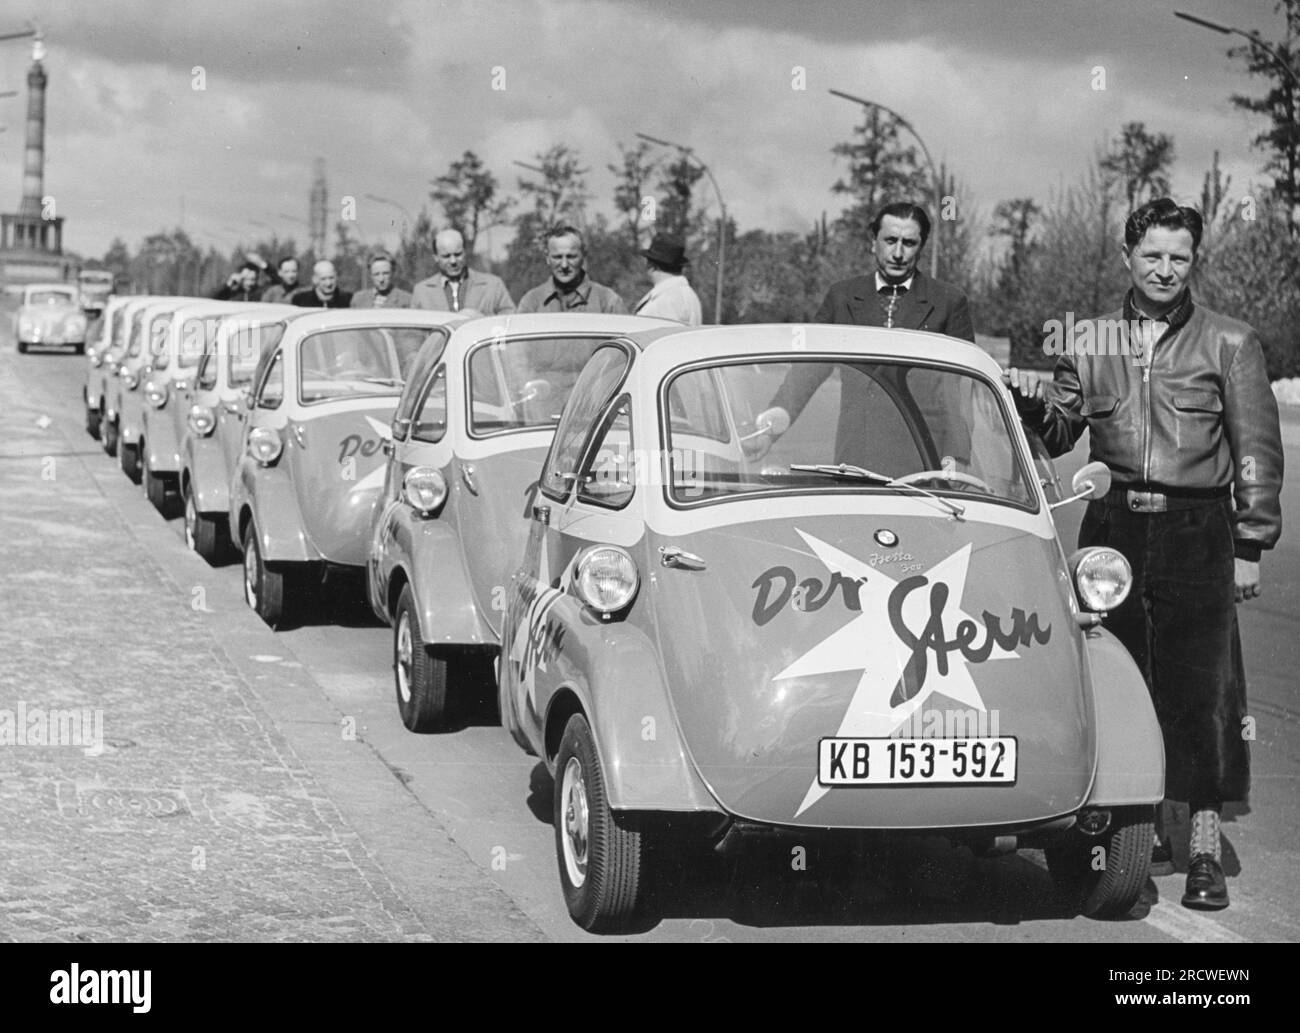 Transport / Transport, Autos, BMW 300 Isetta, Fahrzeuge des Magazins Stern, Berlin, 1955 / 1956, ADDITIONAL-RIGHTS-CLEARANCE-INFO-NOT-AVAILABLE Stockfoto